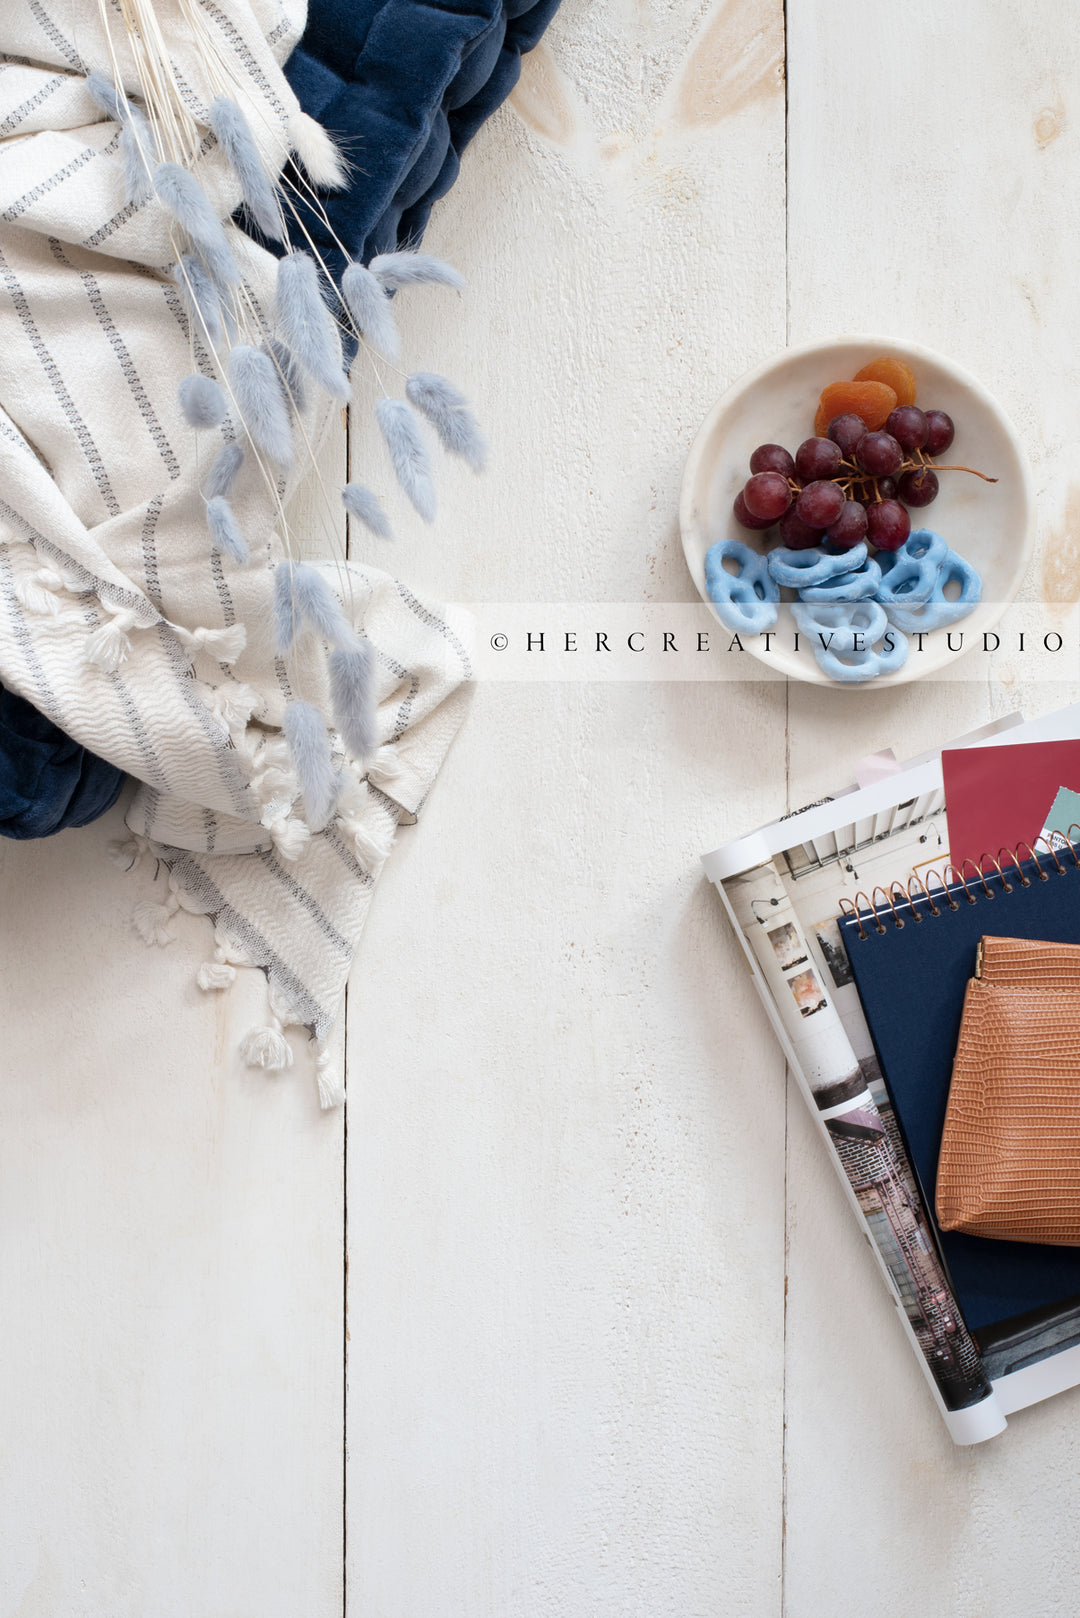 Bunny Tail, Notebook & Grapes on Wood Background